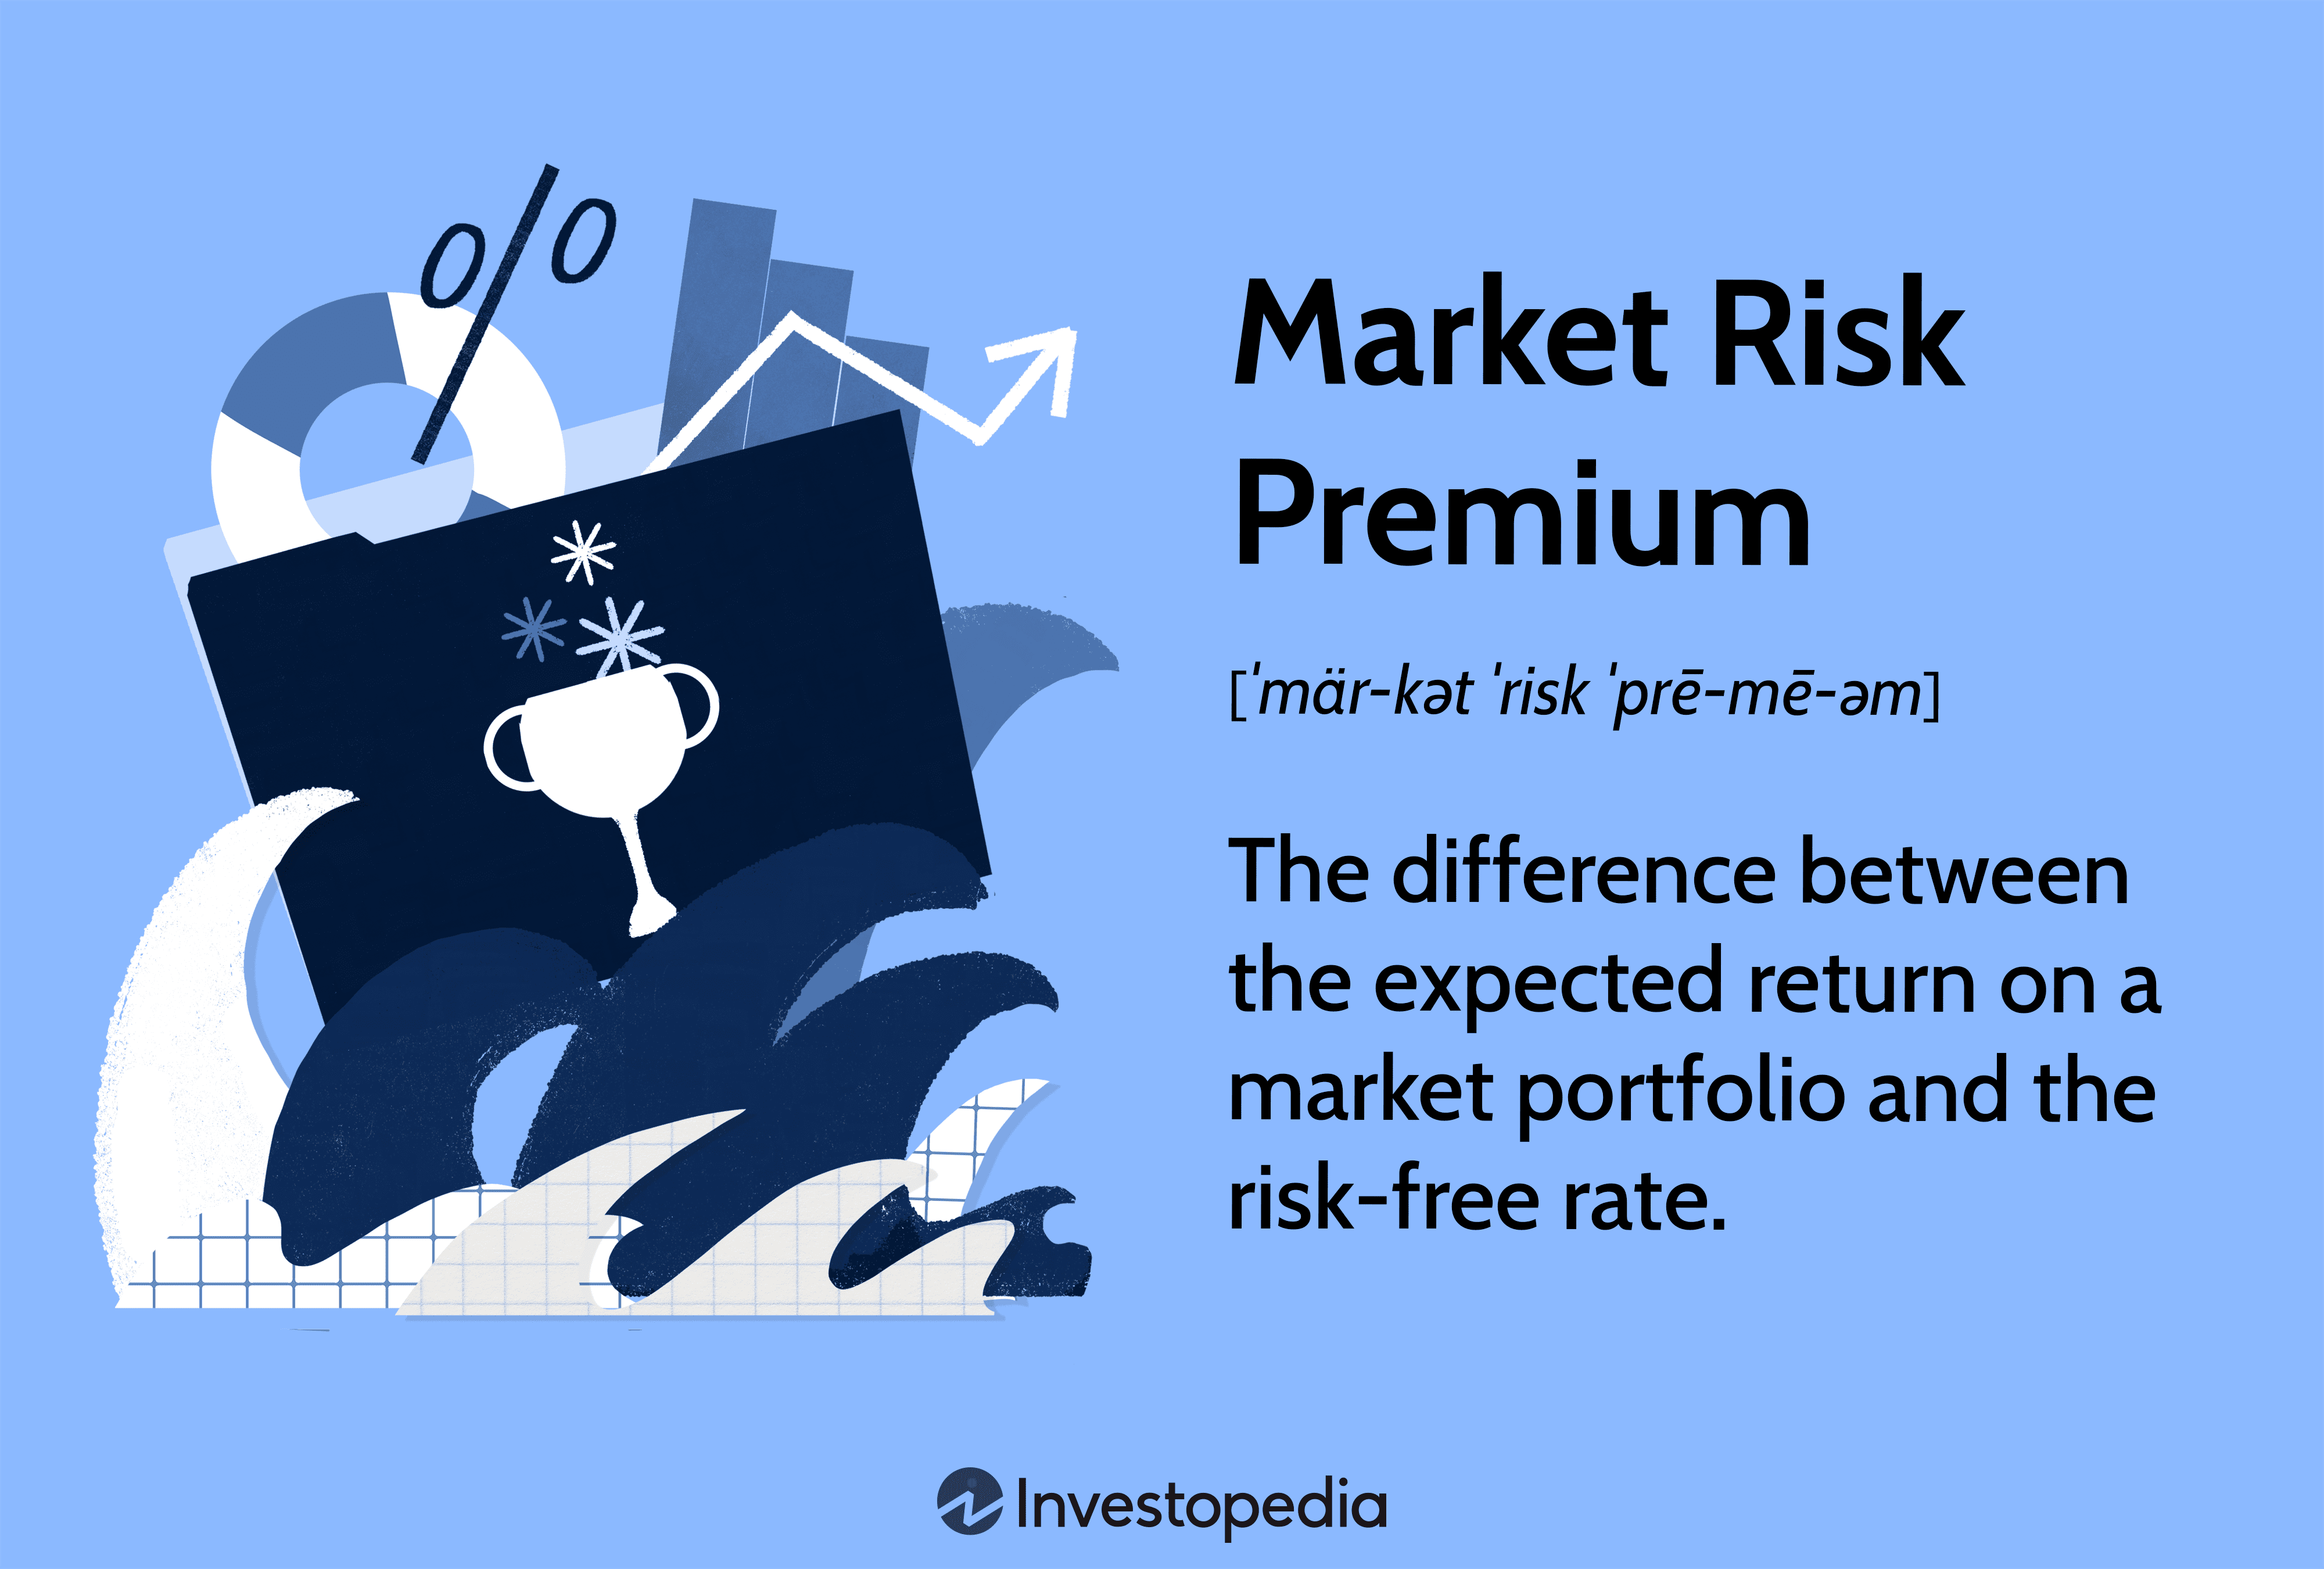 Market Risk Premium: The difference between the expected return on a market portfolio and the risk-free rate.